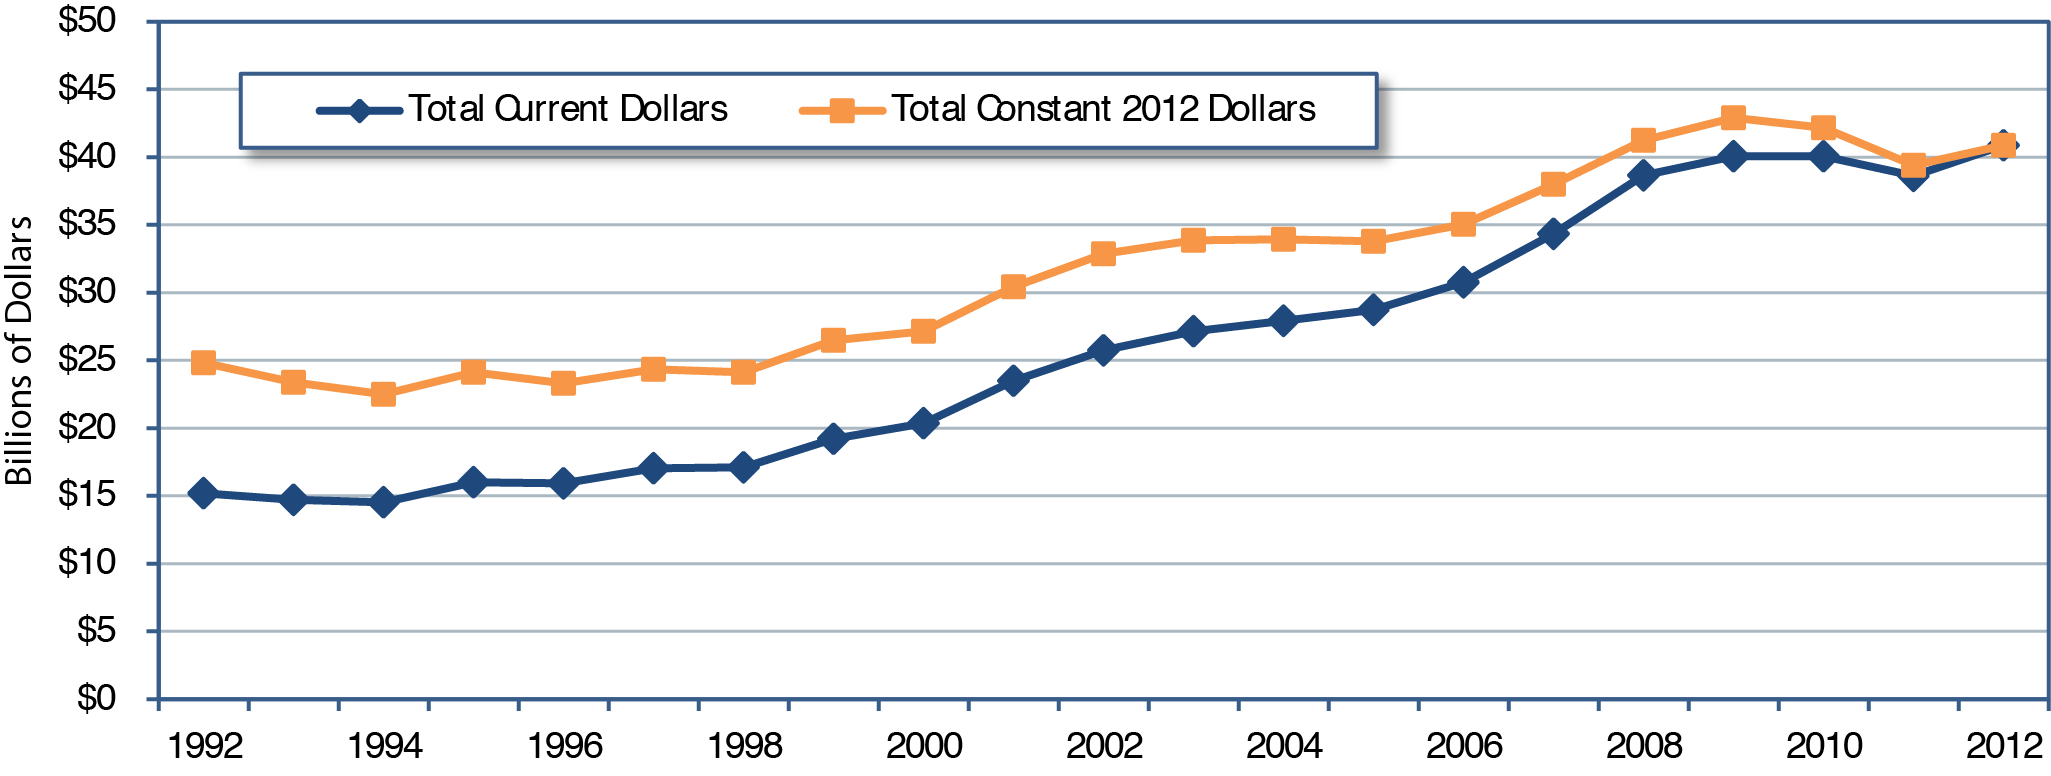 Line chart plots values for funding in current values and constant dollars for the years 1992 through 2012. The plot for total current dollars has an initial value of $15.2 billion in the year 1992 and increases slowly to a value of $20.4 billion in the year 2000. The plot swings upward to a value of $28.7 billion in the year 2005 and then increases more sharply to end at a value of $40.9 billion in the year 2012. The plot for constant 2012 dollars has an initial value of $24.8 billion in the year 1992 and trends slightly higher over the years, reaching a value of $24.1 billion in the year 1998. The plot swings upward to a value of $32.9 billion in the year 2002, levels off through the year 2005, then peaks at $42.9 billion in the year 2009, and drops to end at a value of $40.9 billion in the year 2012. Source: National Transit Database. 